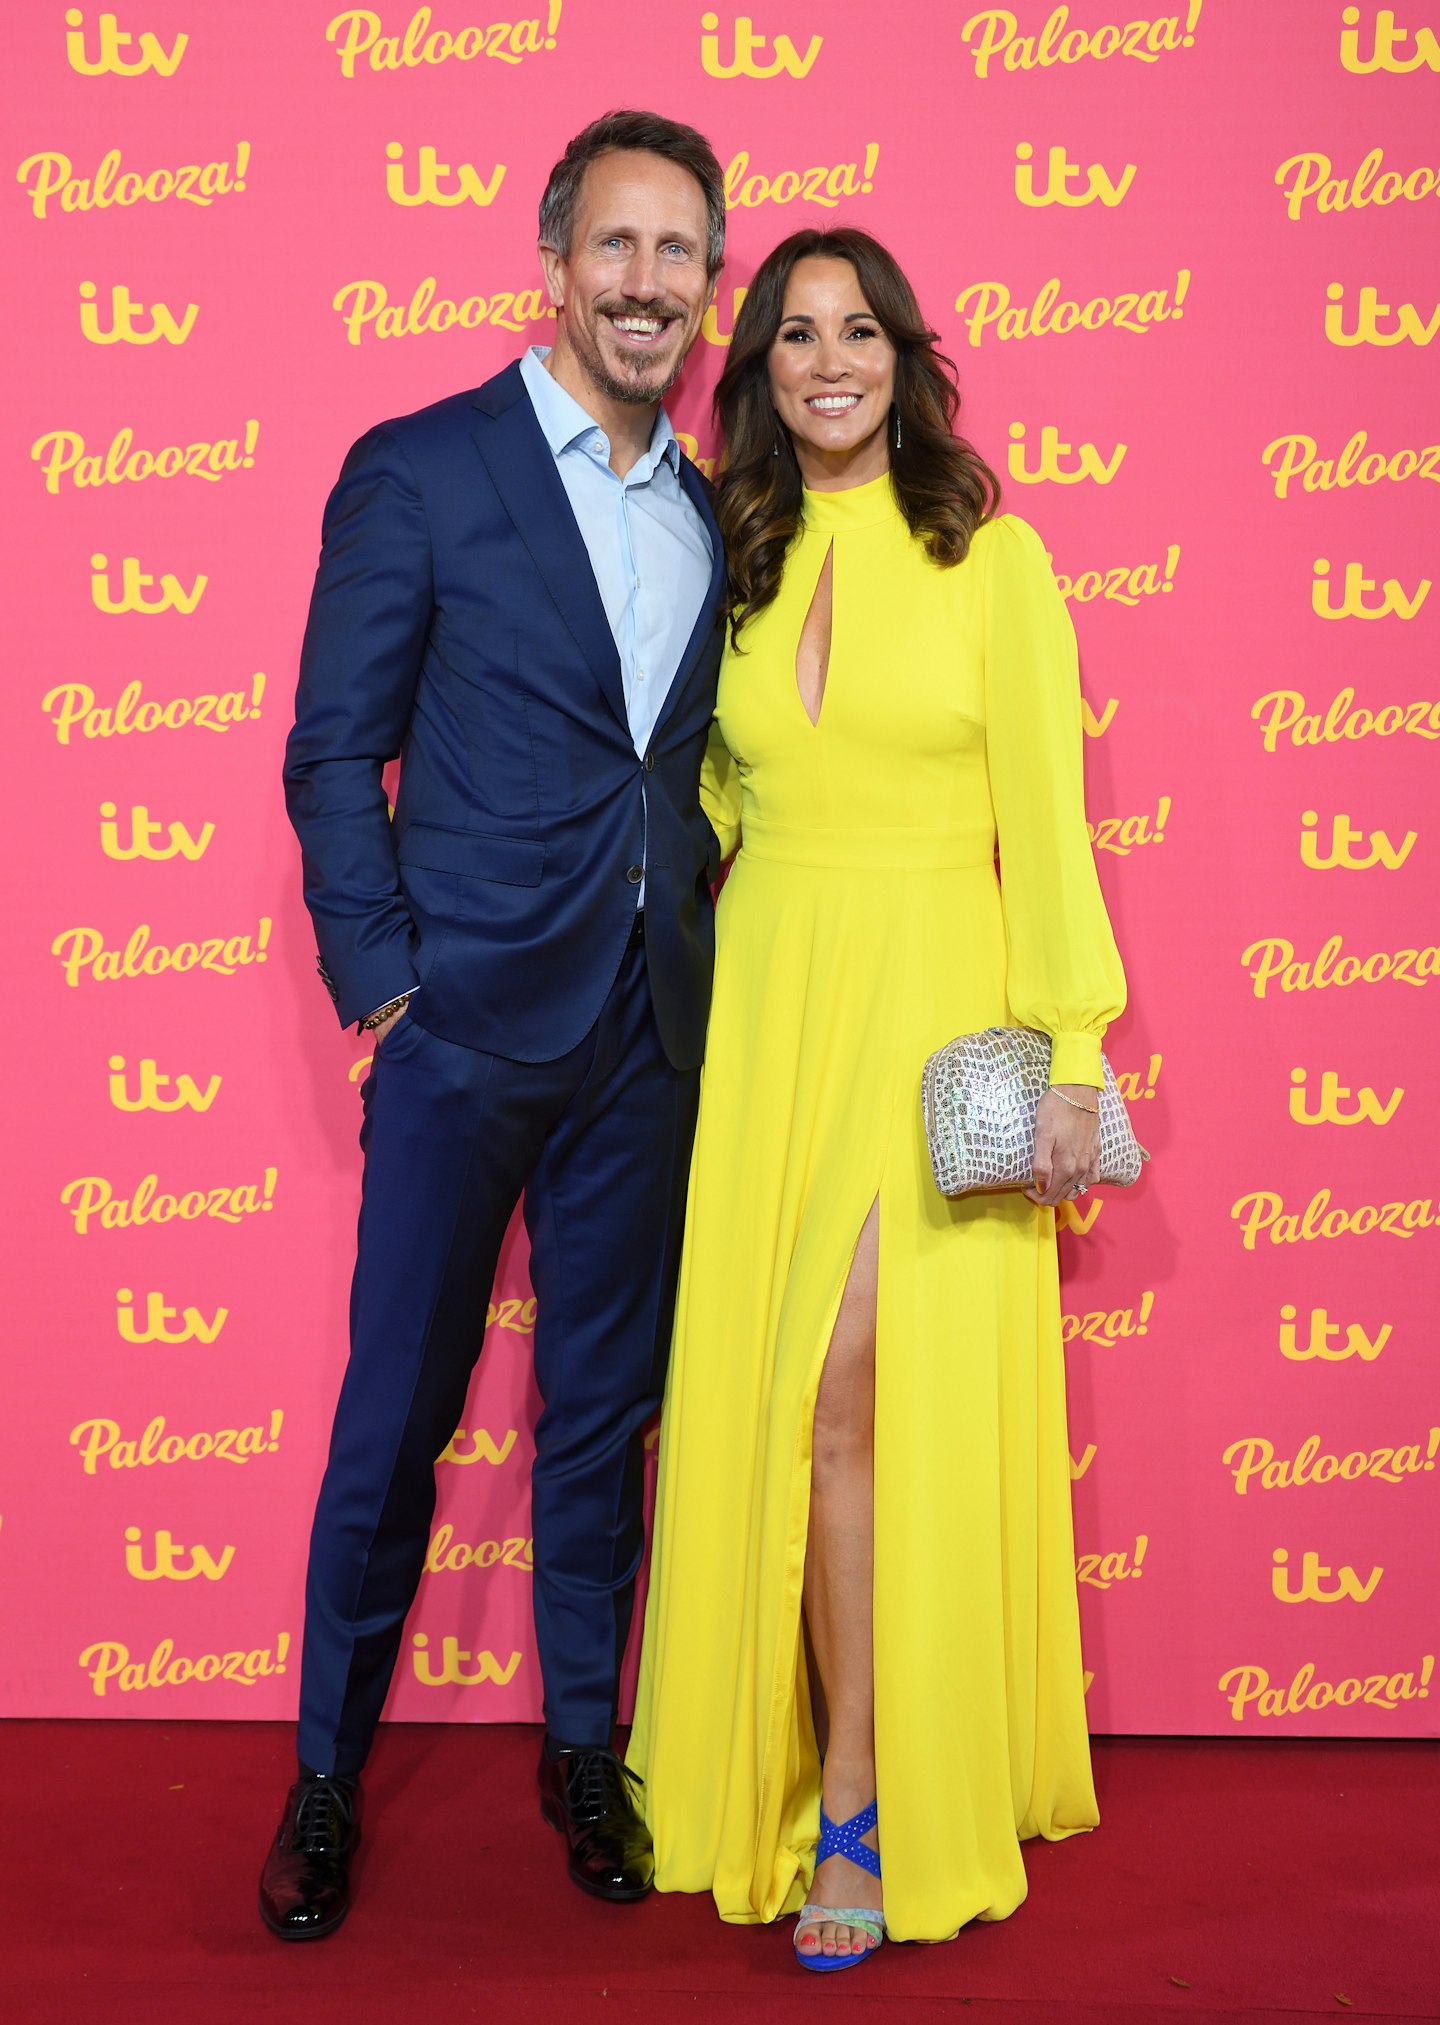 andrea mclean and nick